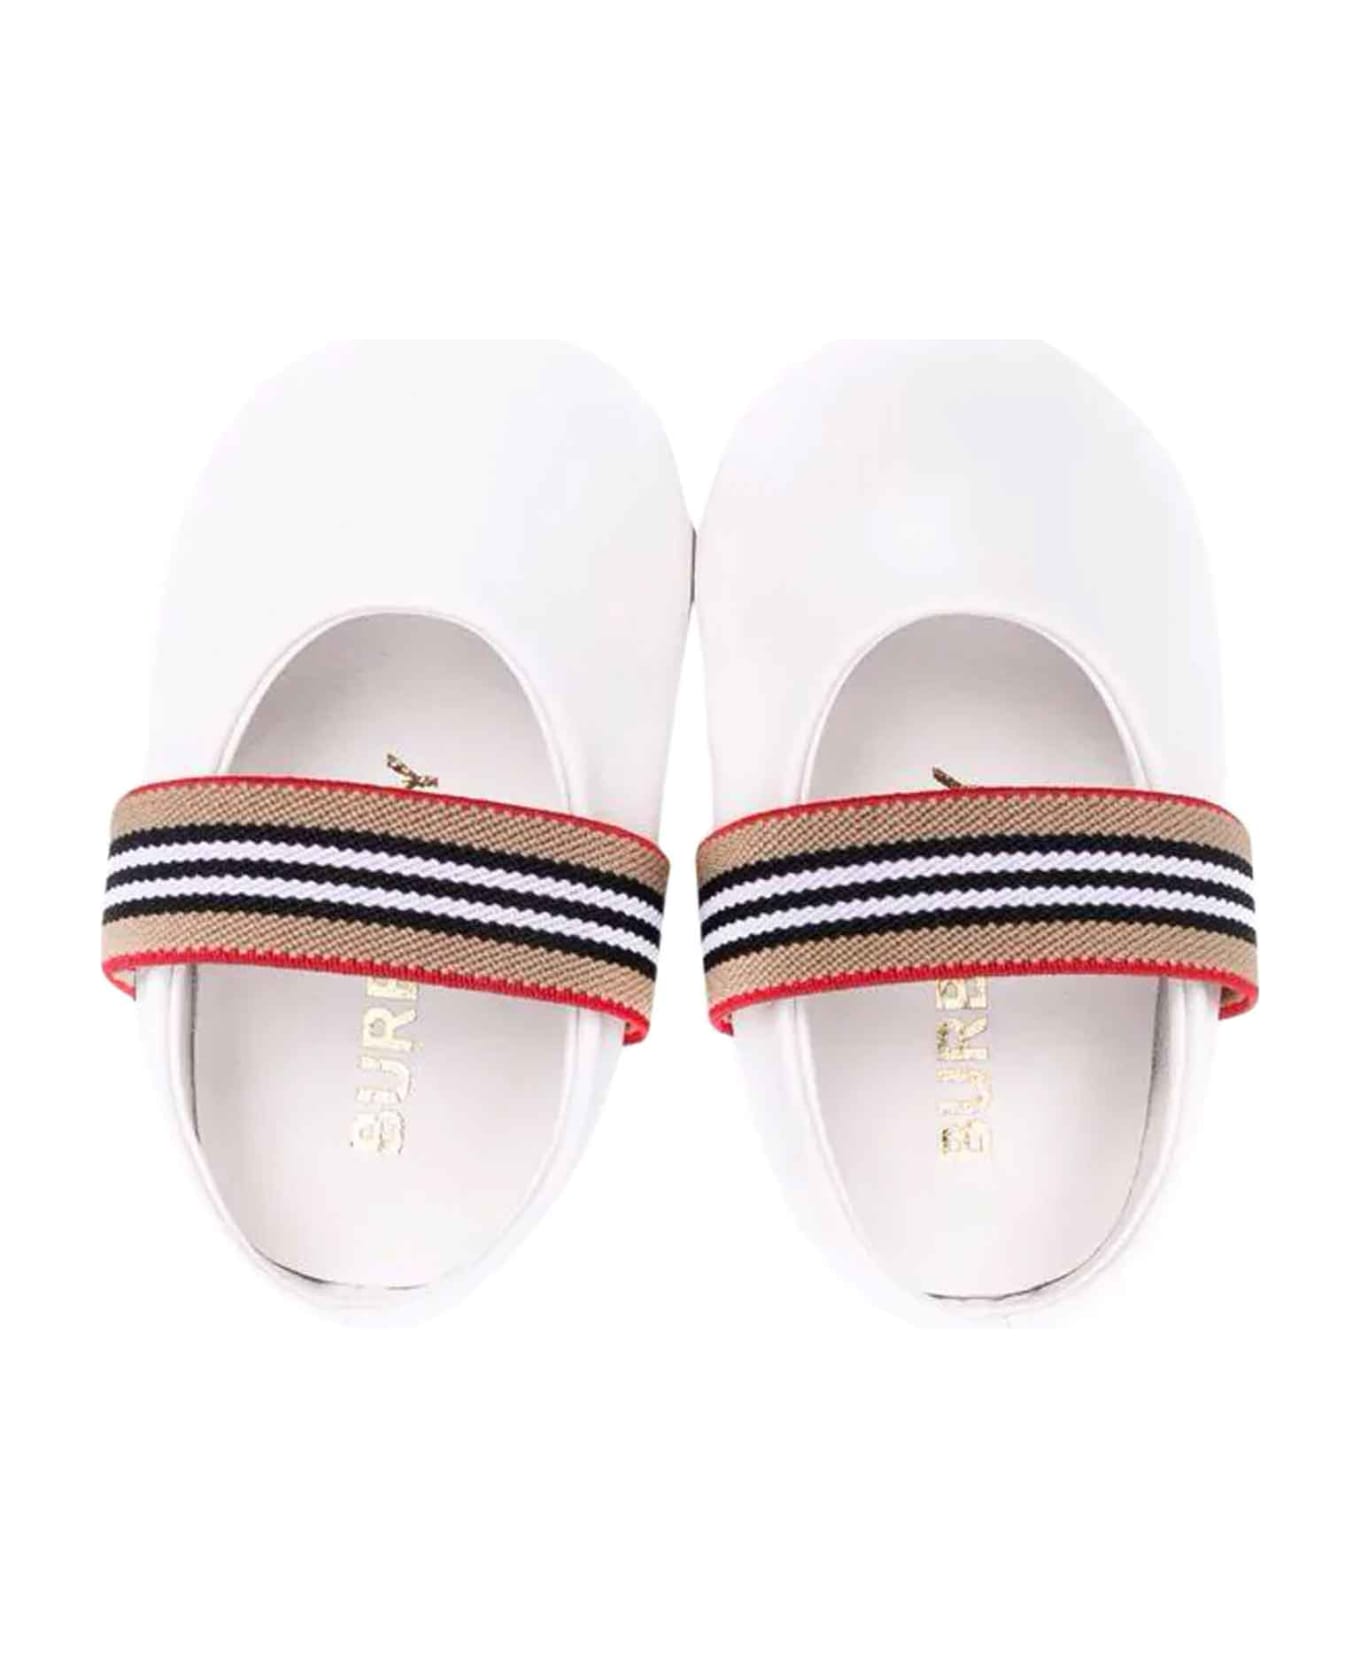 Burberry Ballet Flats With Check Print - Bianco